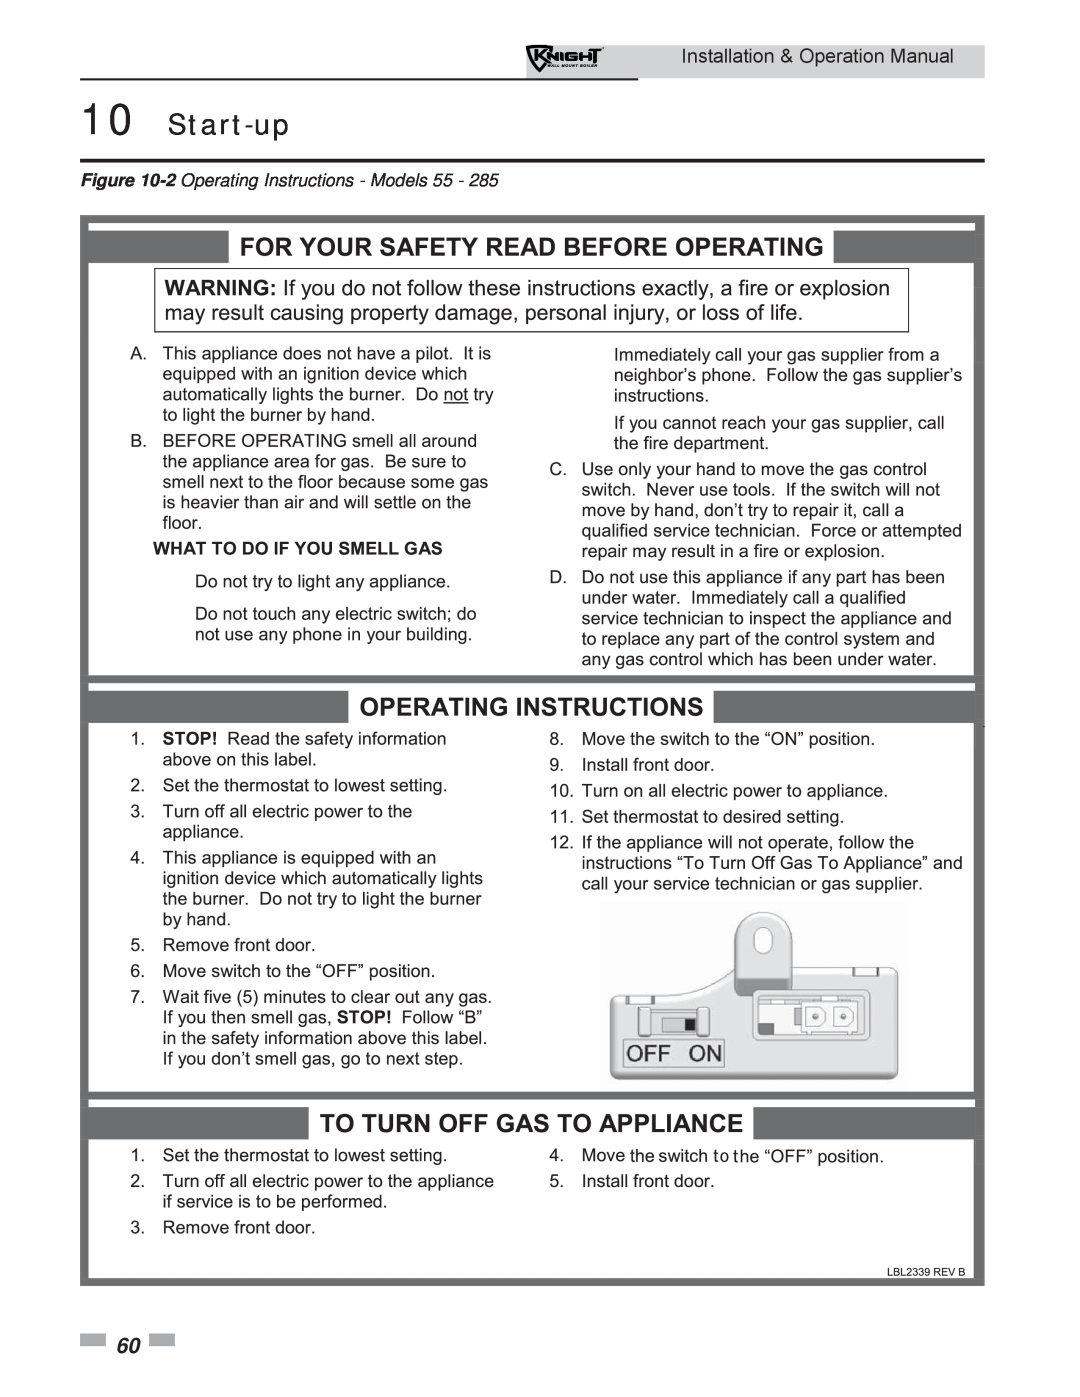 Lochinvar WH 55-399 operation manual 2 Operating Instructions - Models 55, Start-up 